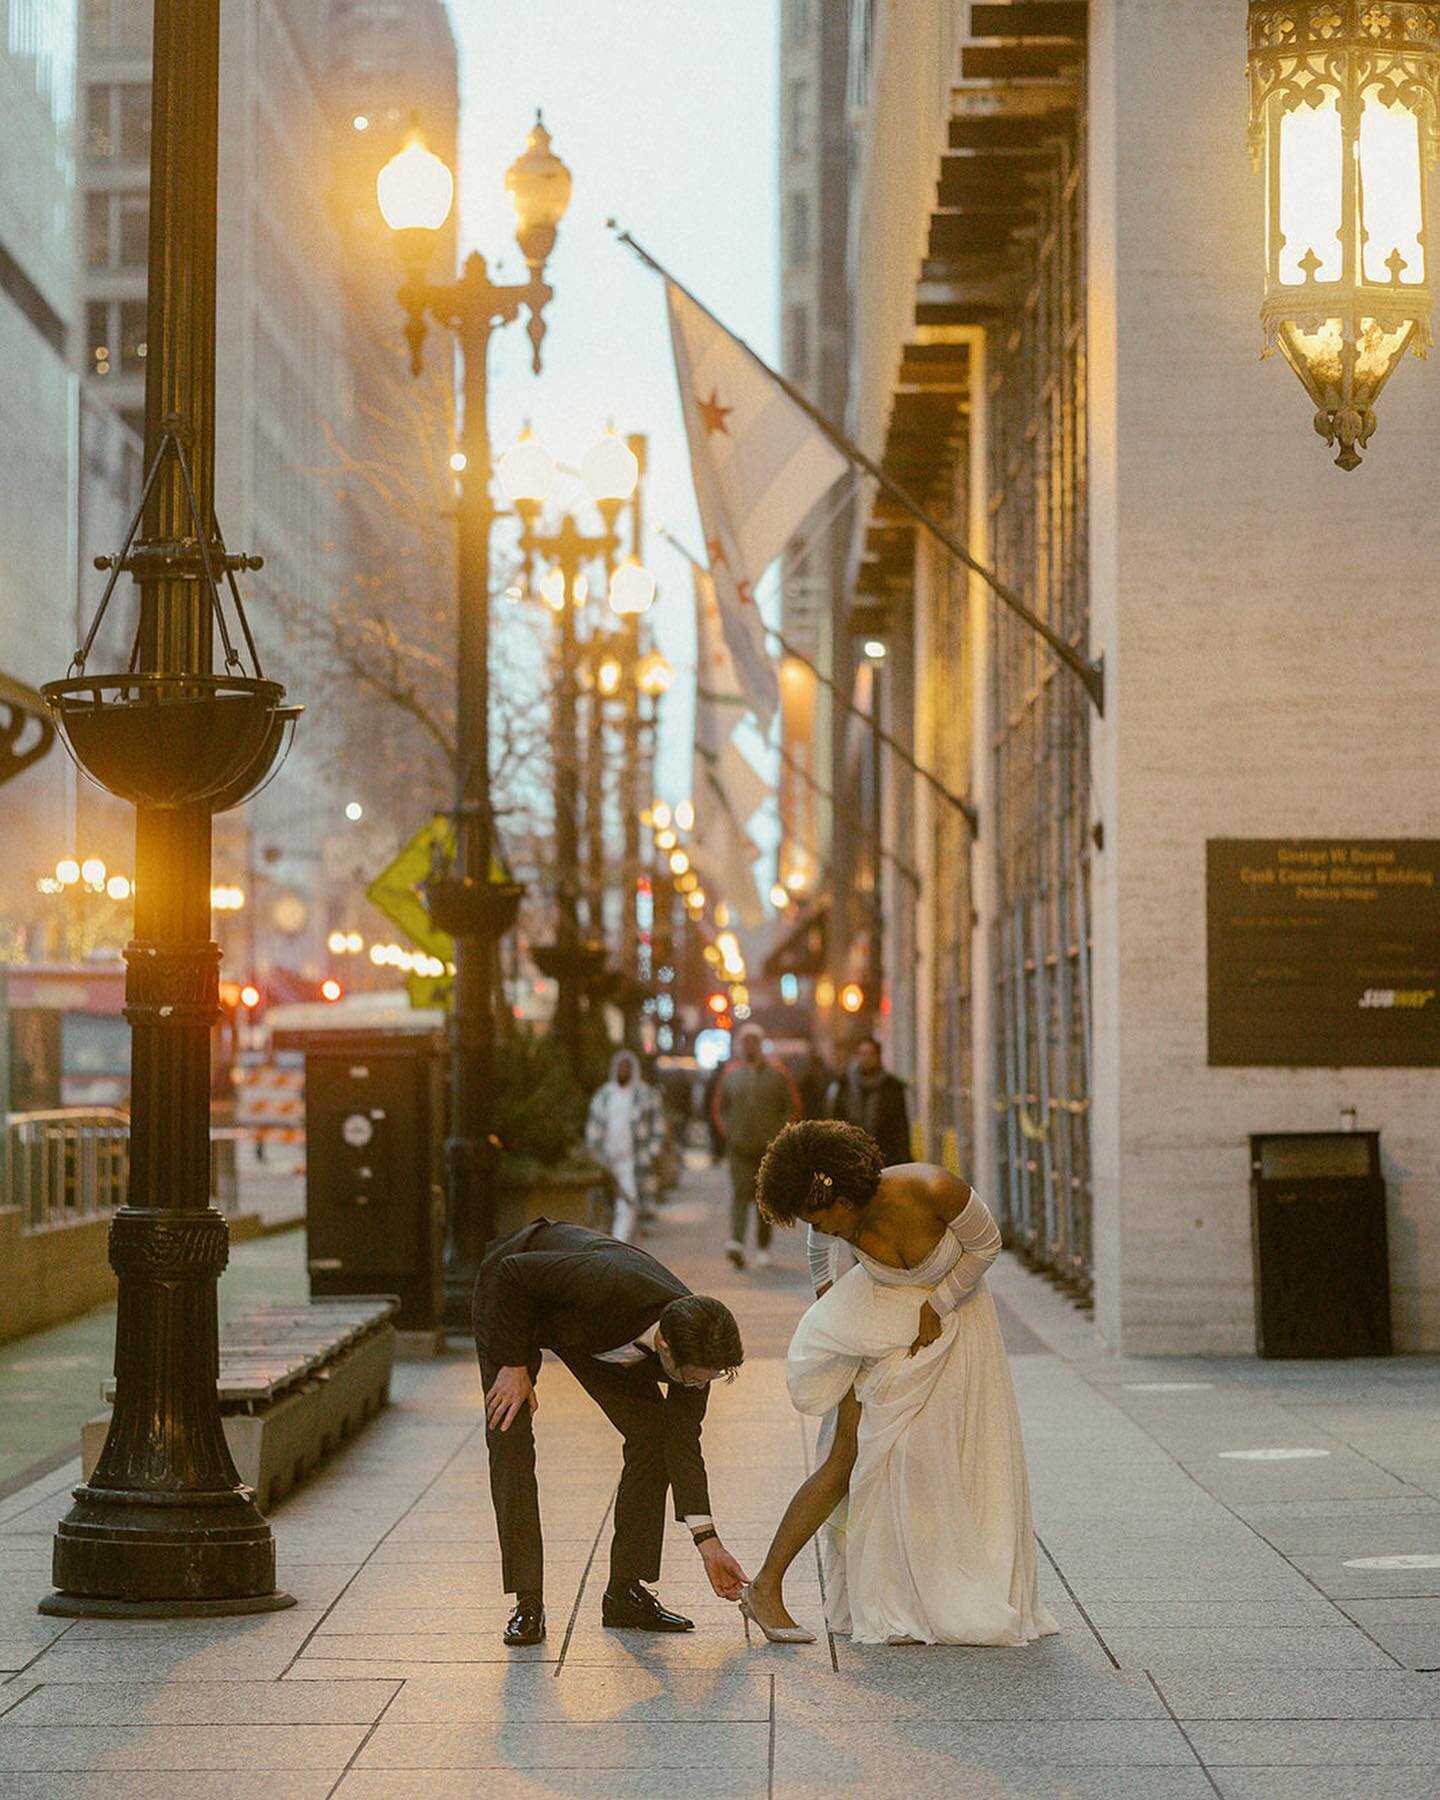 Tim + Rachel just being so madly in love. What an absolute joy it was to document their intimate wedding Downtown at The Chicago Temple Building! 2023 is filling up fast so let&rsquo;s connect if you are looking for some dreamy photos of you and your